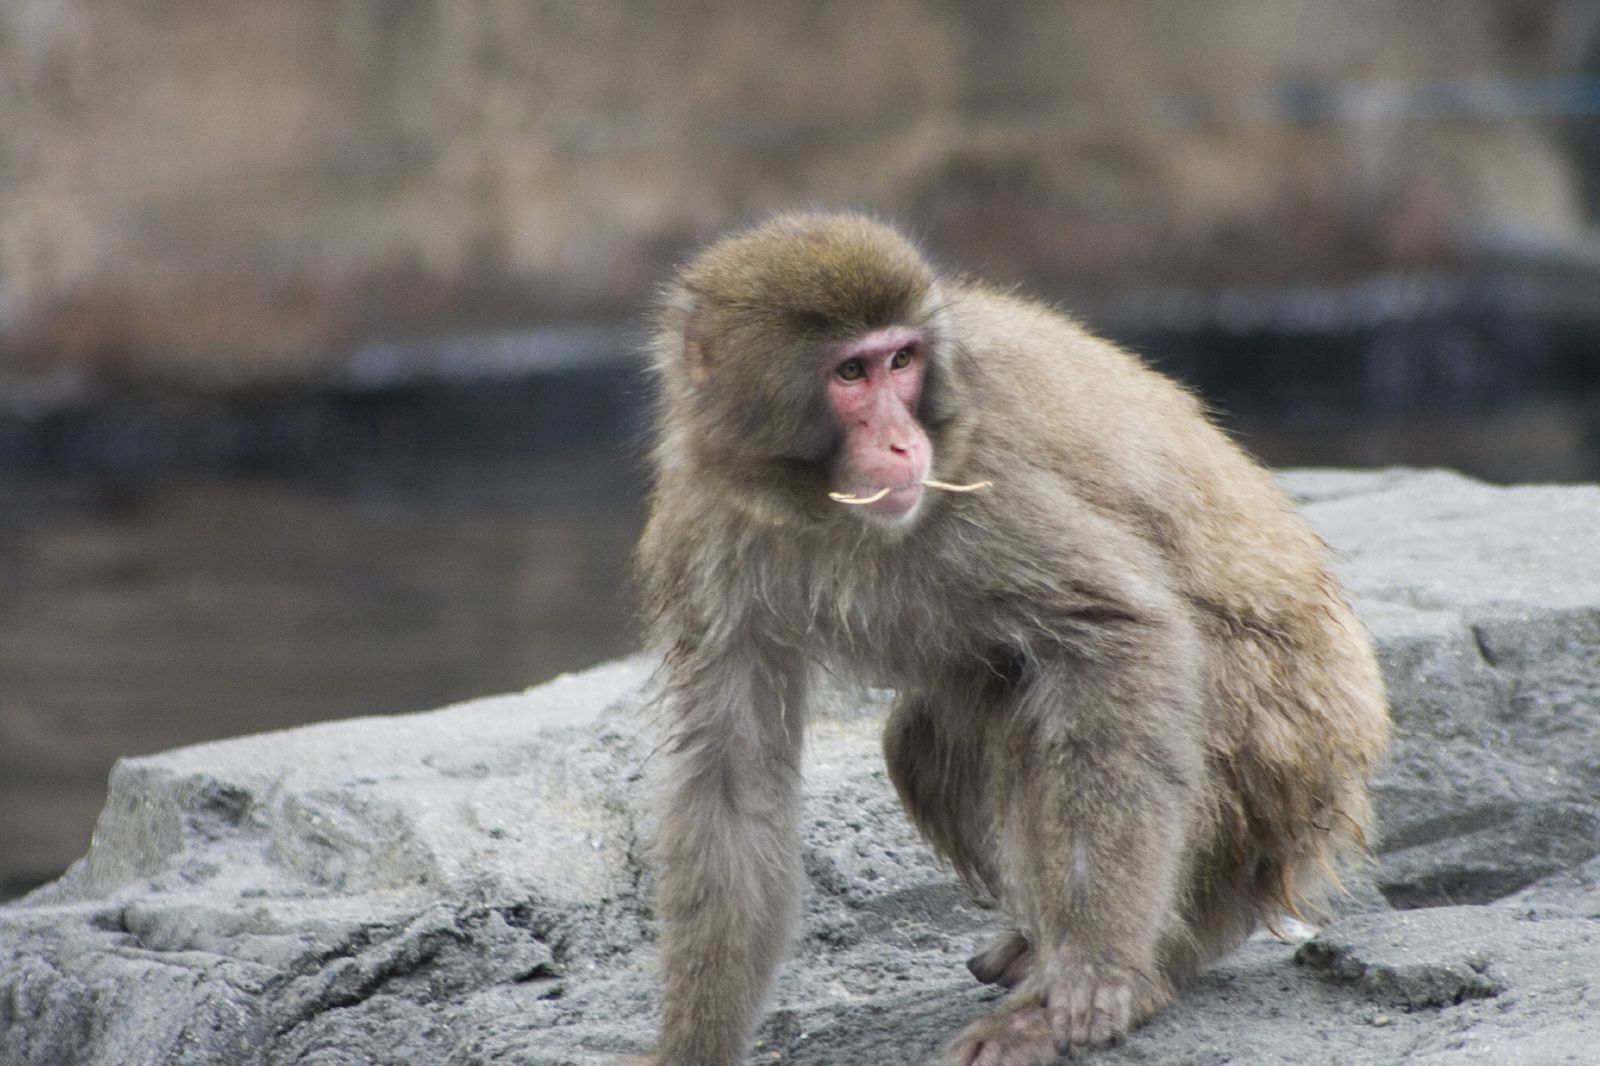 a small brown monkey standing on rocks near water